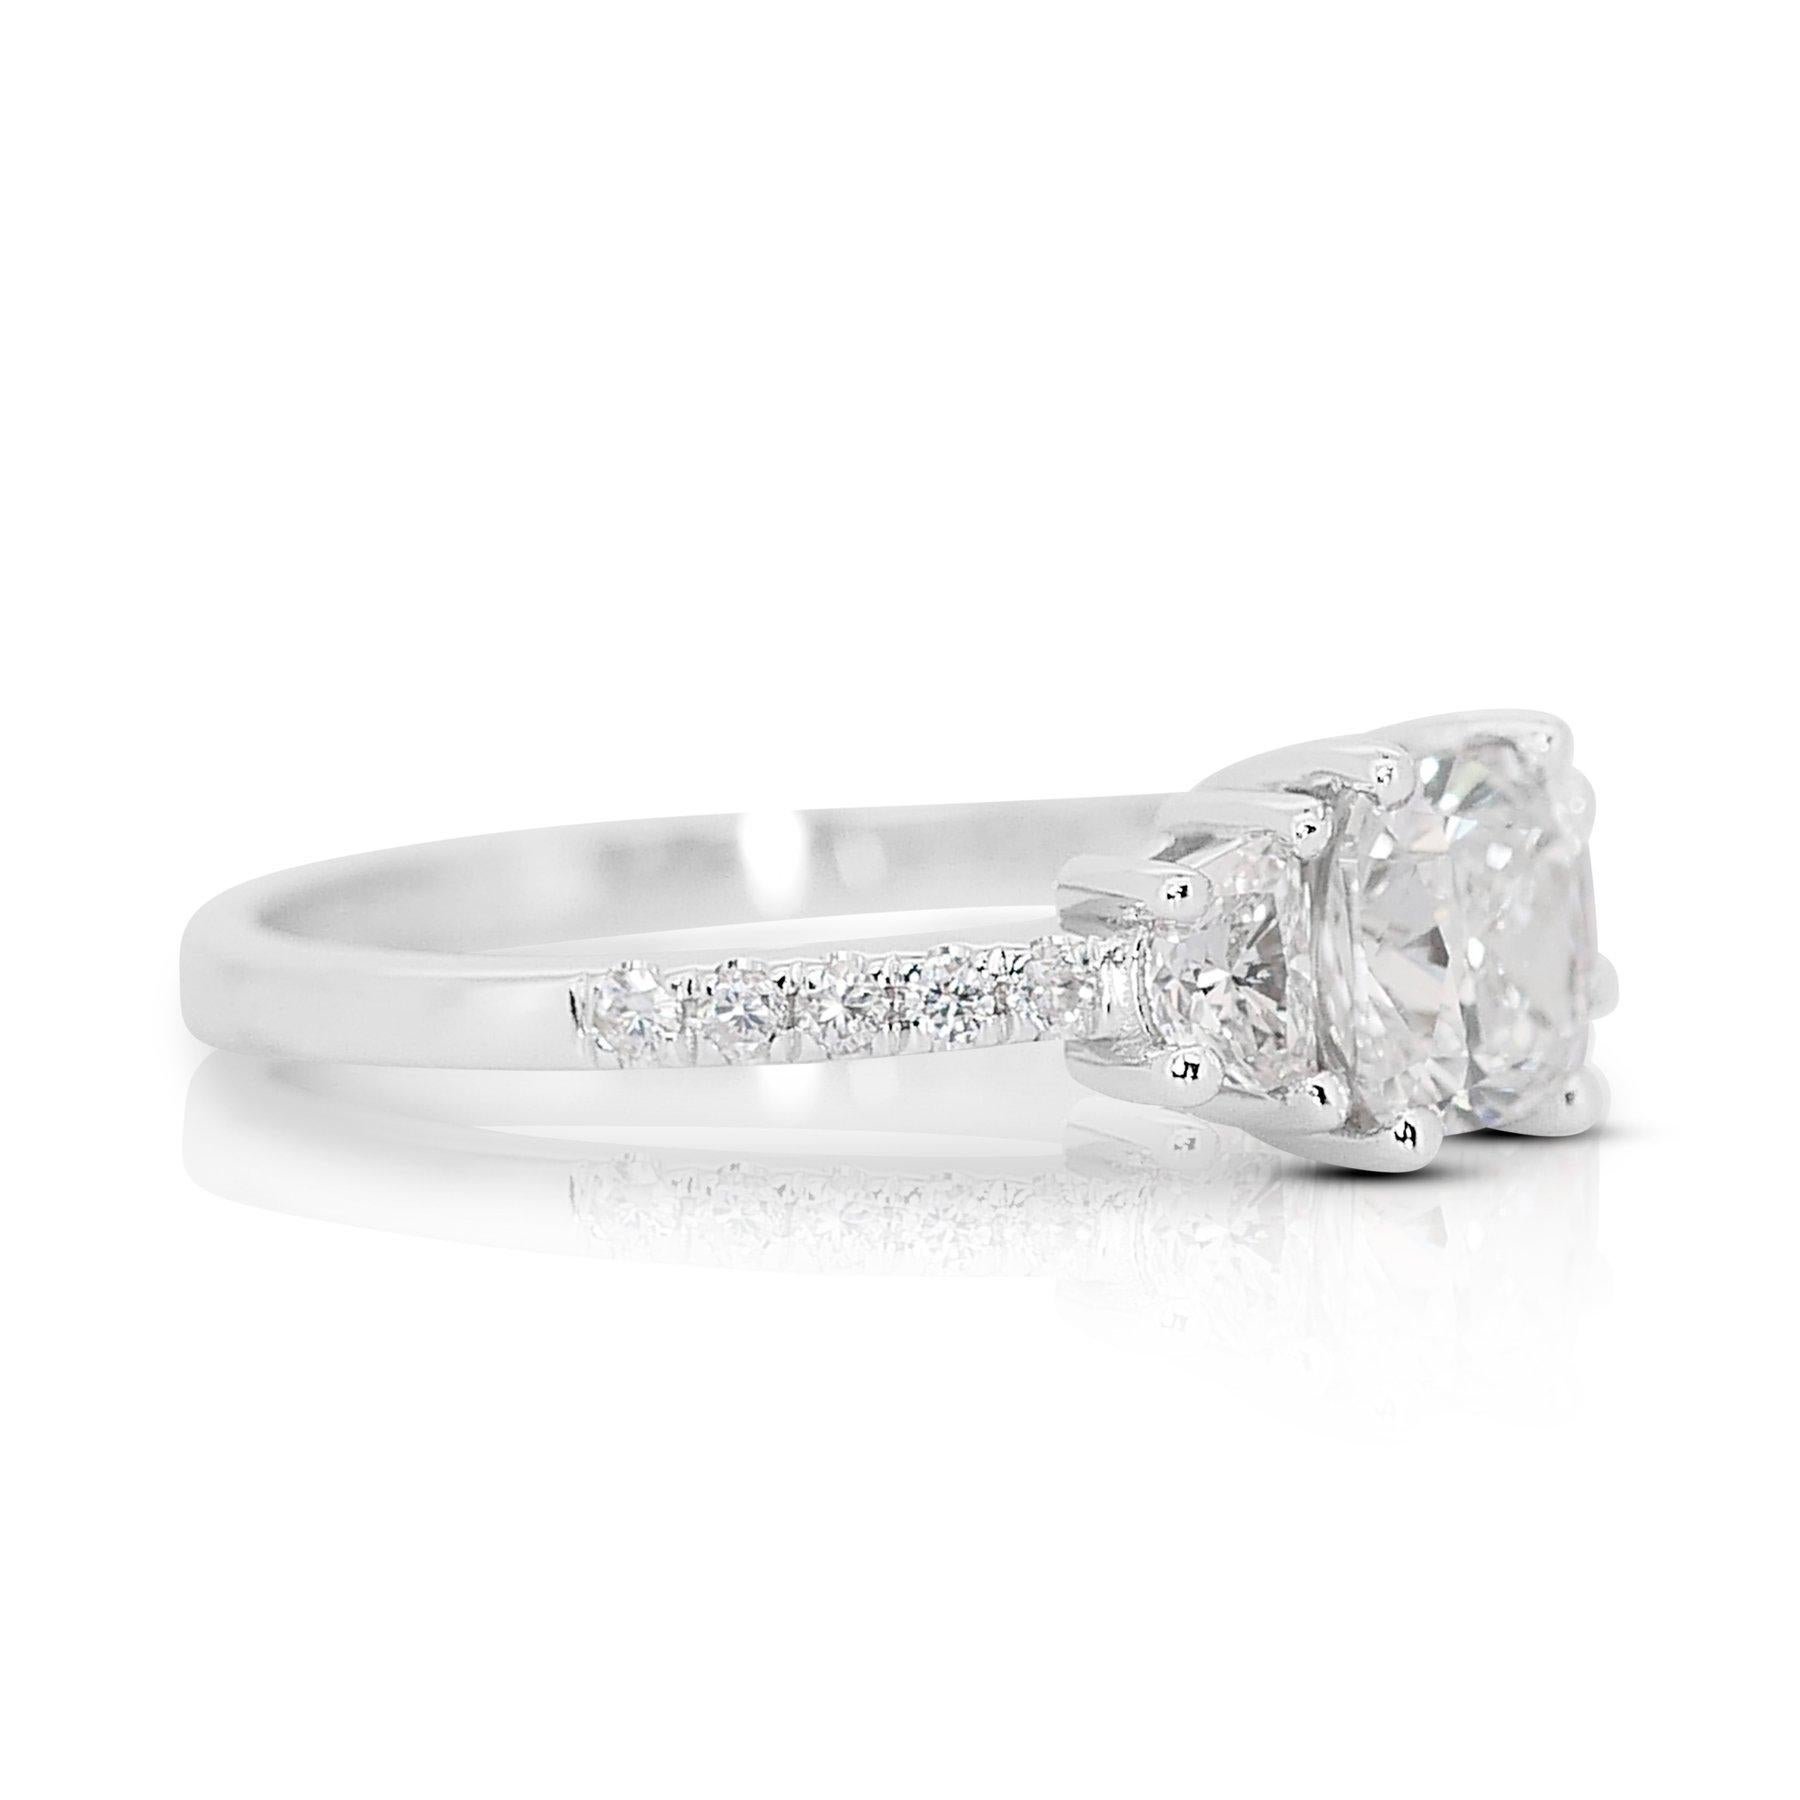 Cushion Cut Luxurious 1.42ct Cushion Diamond Pave Ring in 18k White Gold - GIA Certified For Sale